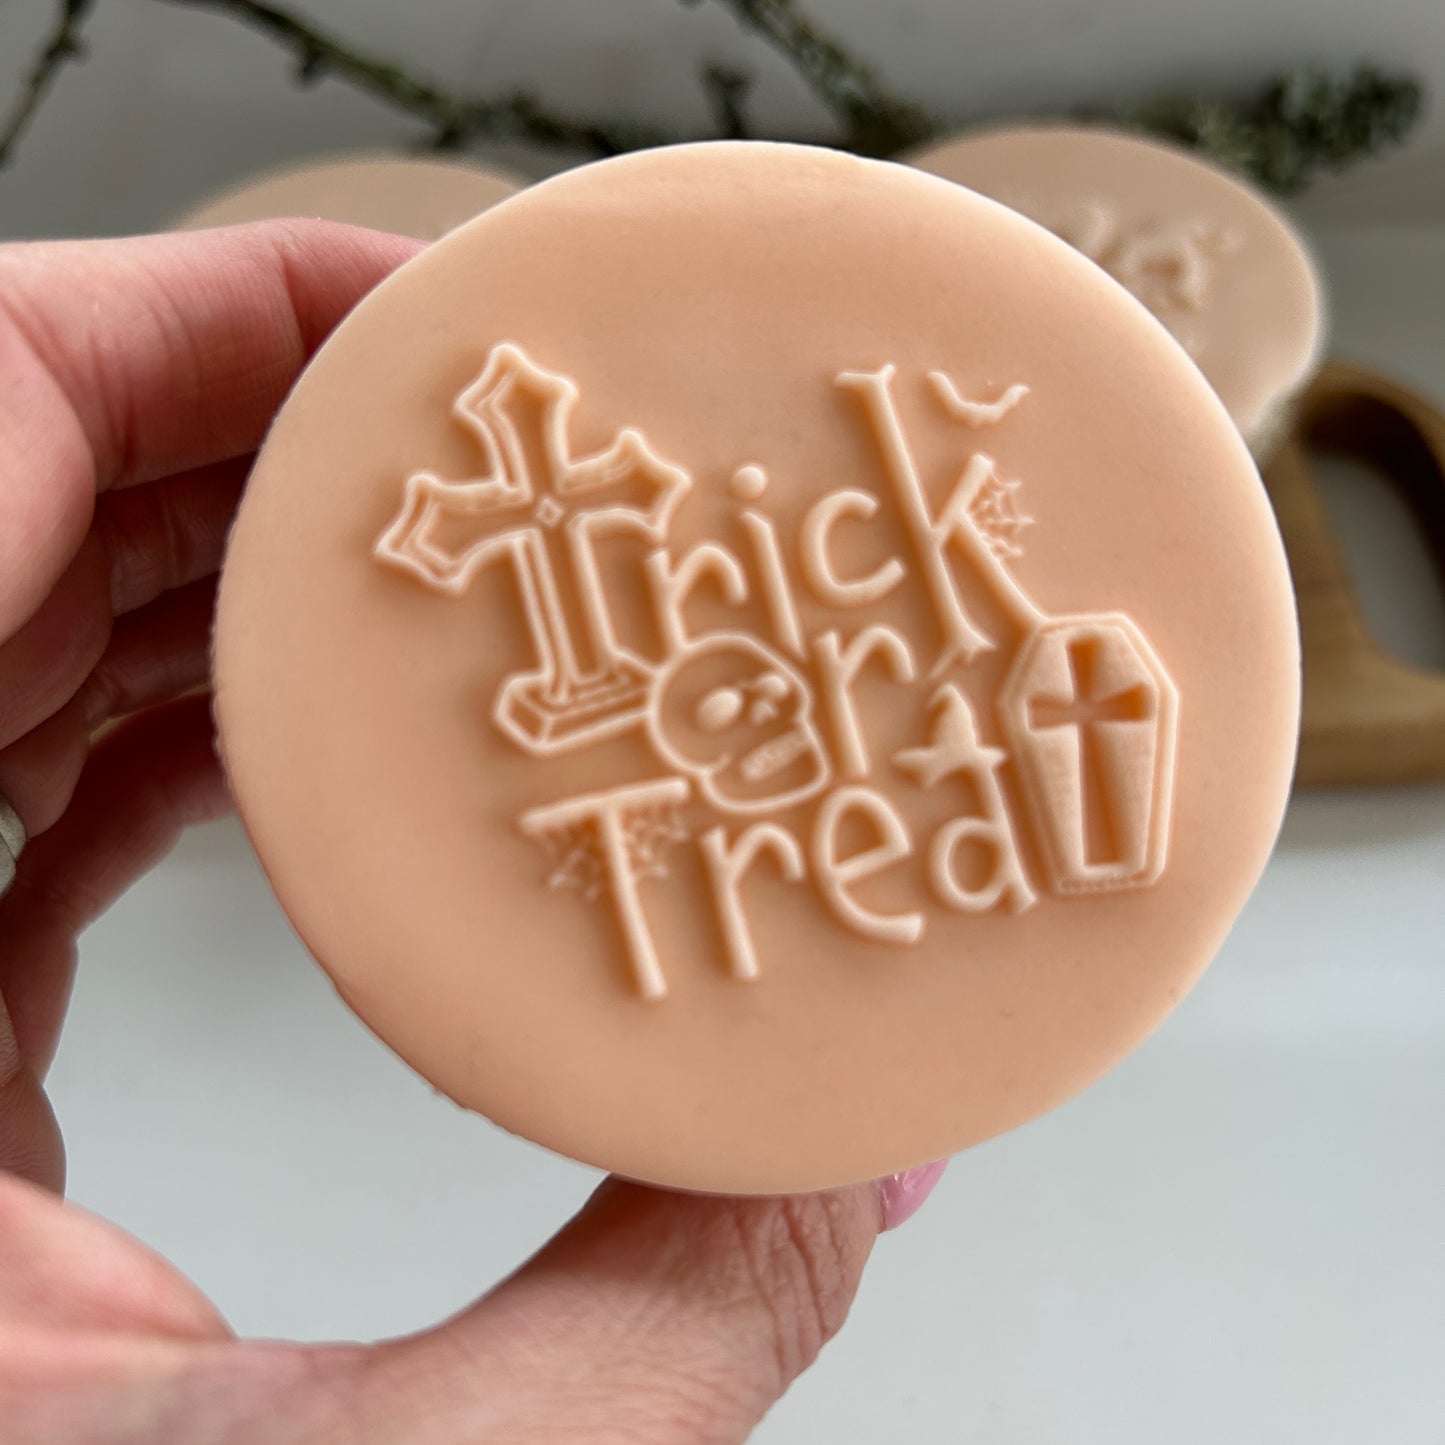 Trick or Treat with coffin and skull embossing stamp